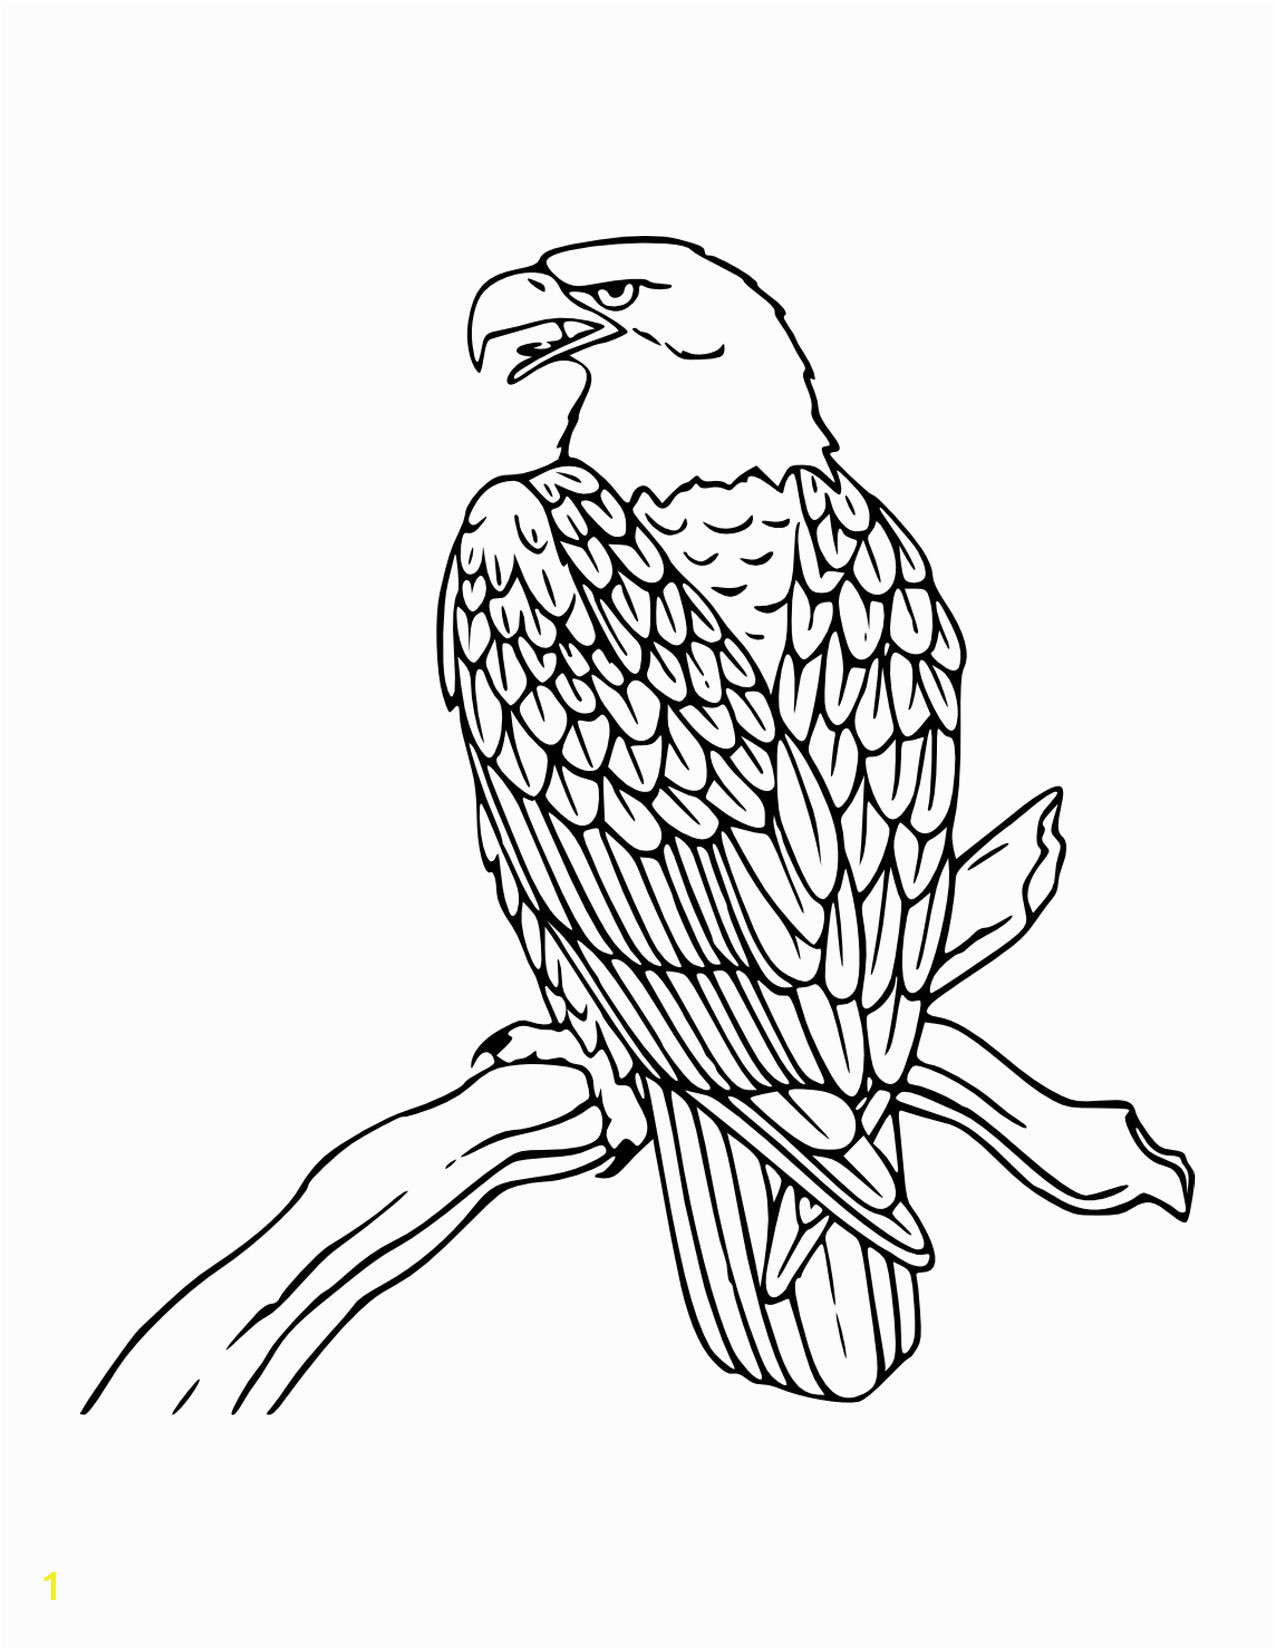 Free Printable Bald Eagle Coloring Pages Free Printable Bald Eagle Coloring Pages for Kids